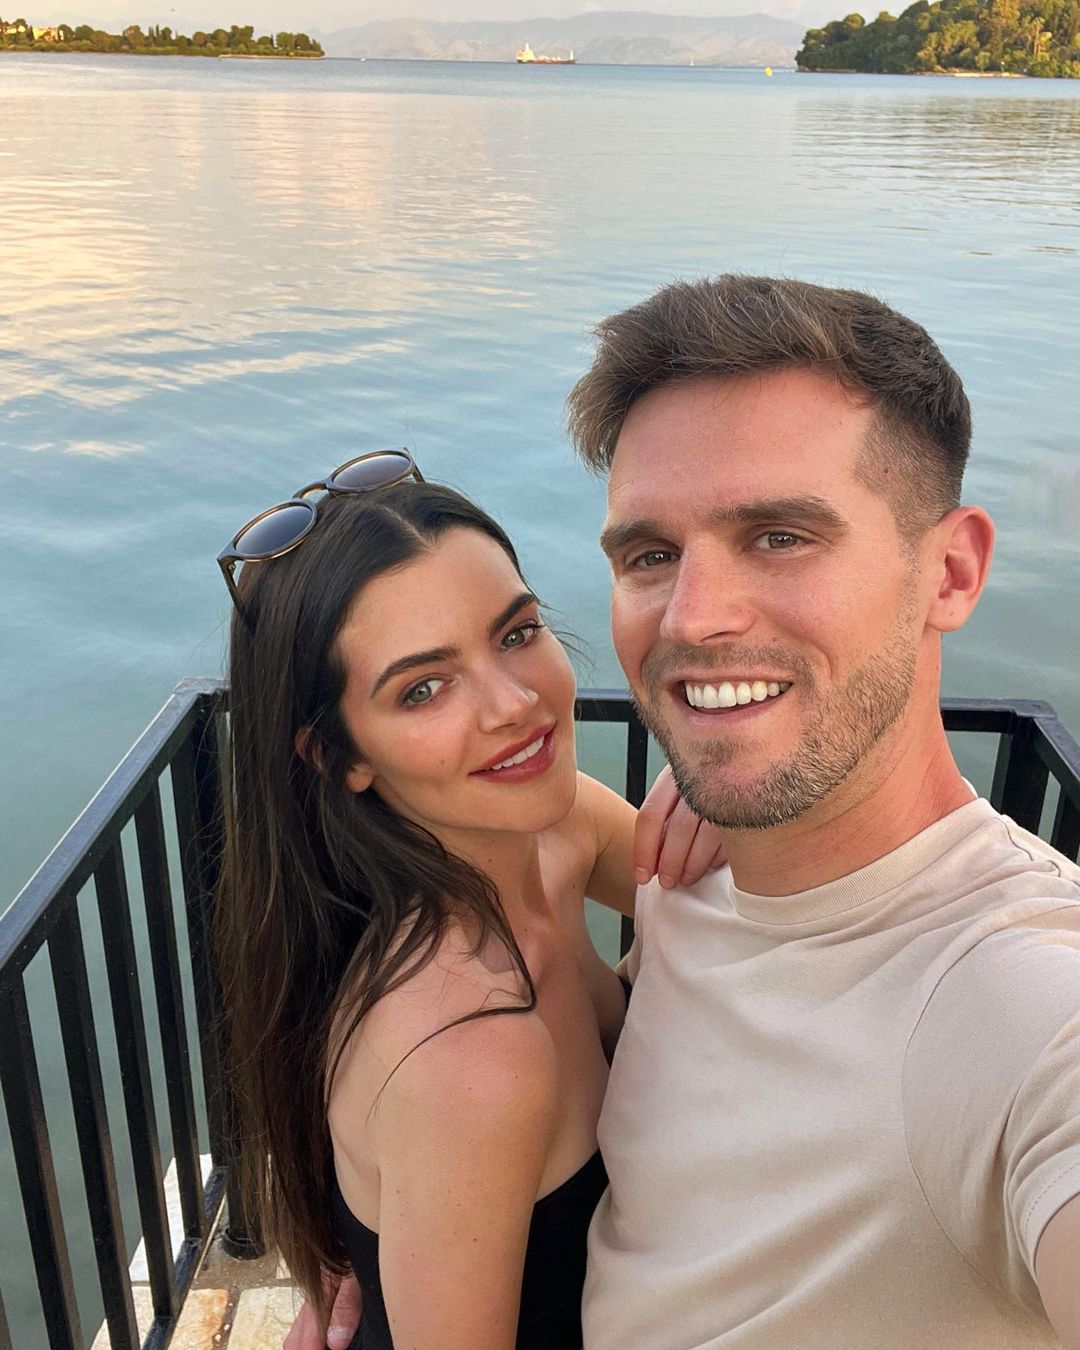 Gaz Beadle’s ex Emma McVey hits back at trolls who accuse her of taking his money and insists she’s ‘going through hell’